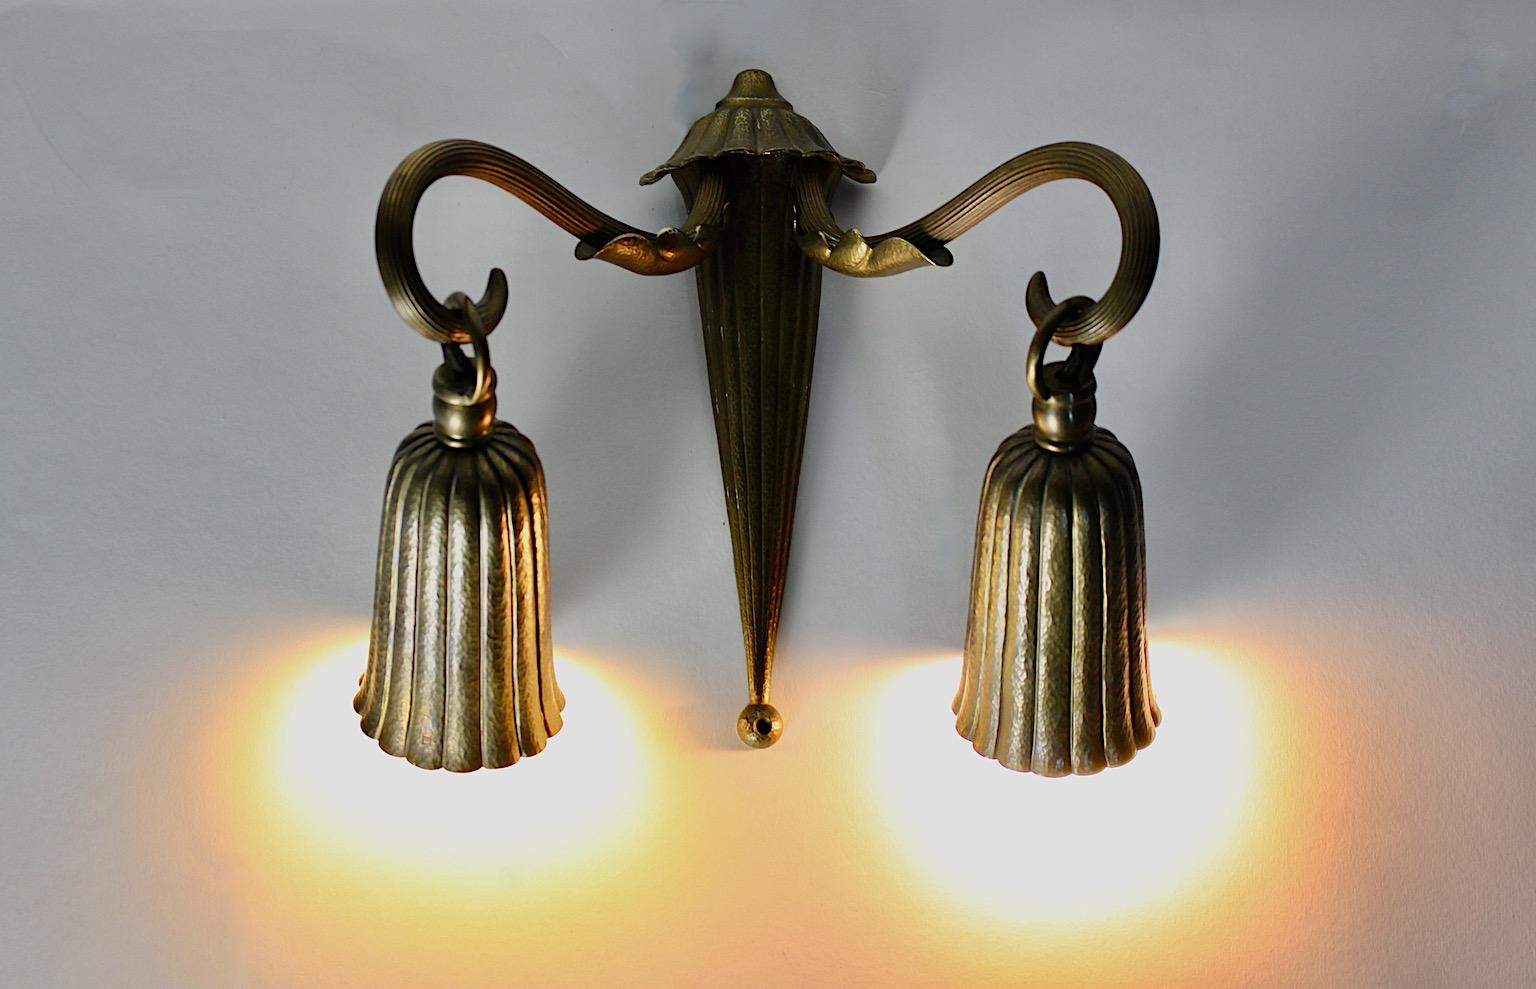 Art Deco vintage brass sconce or wall lighting bell like 1930s Austria.
An amazing sconce or wall light from hammered brass with bell like shades in charming shape.
This sconce features wonderful details as conical slightly tapered stem and bell